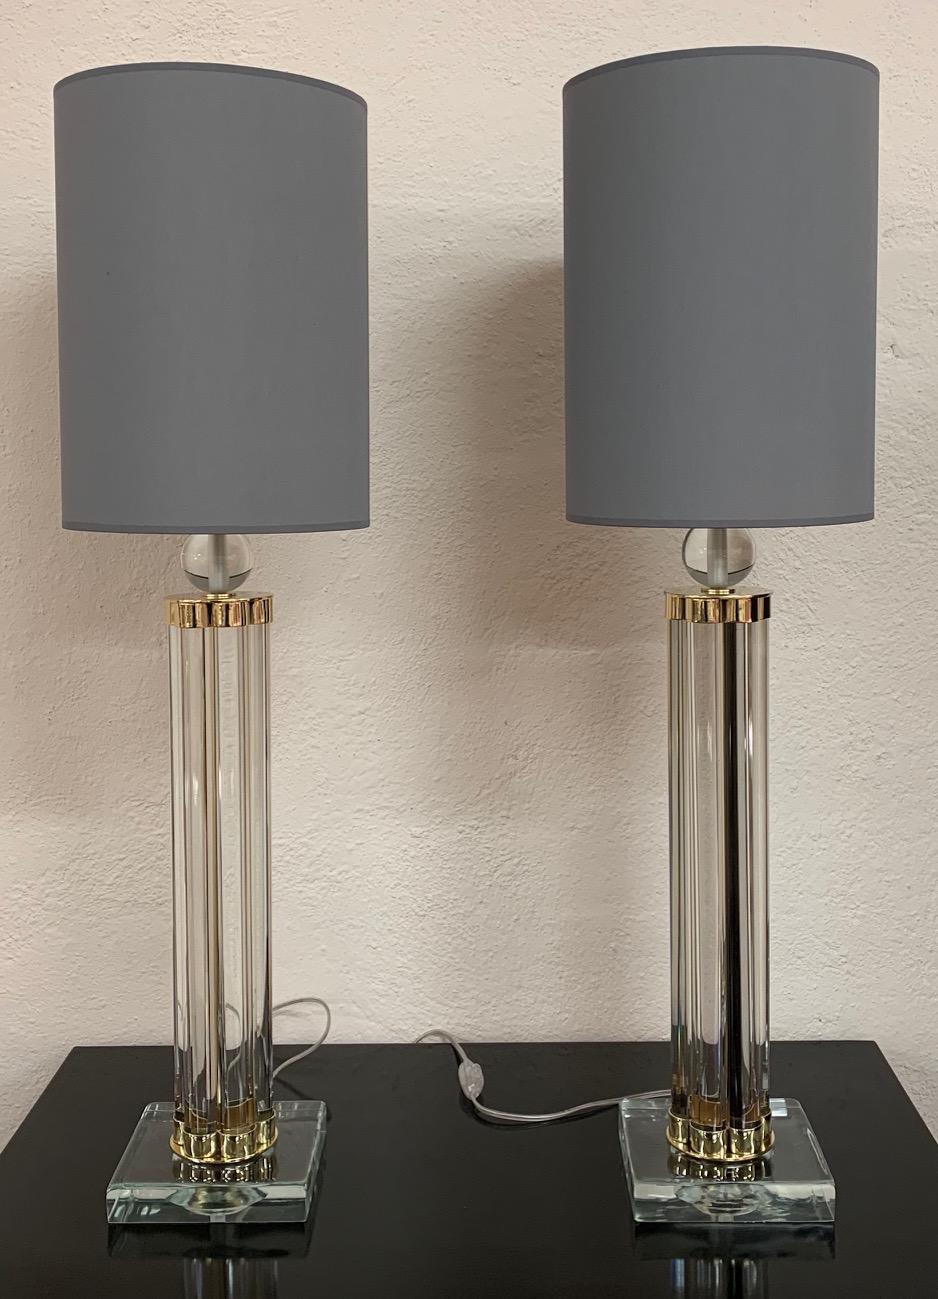 This pair of Murano lamps was produced in Italy in the early 2000s.
The lamps are completely in Murano glass and brass details.